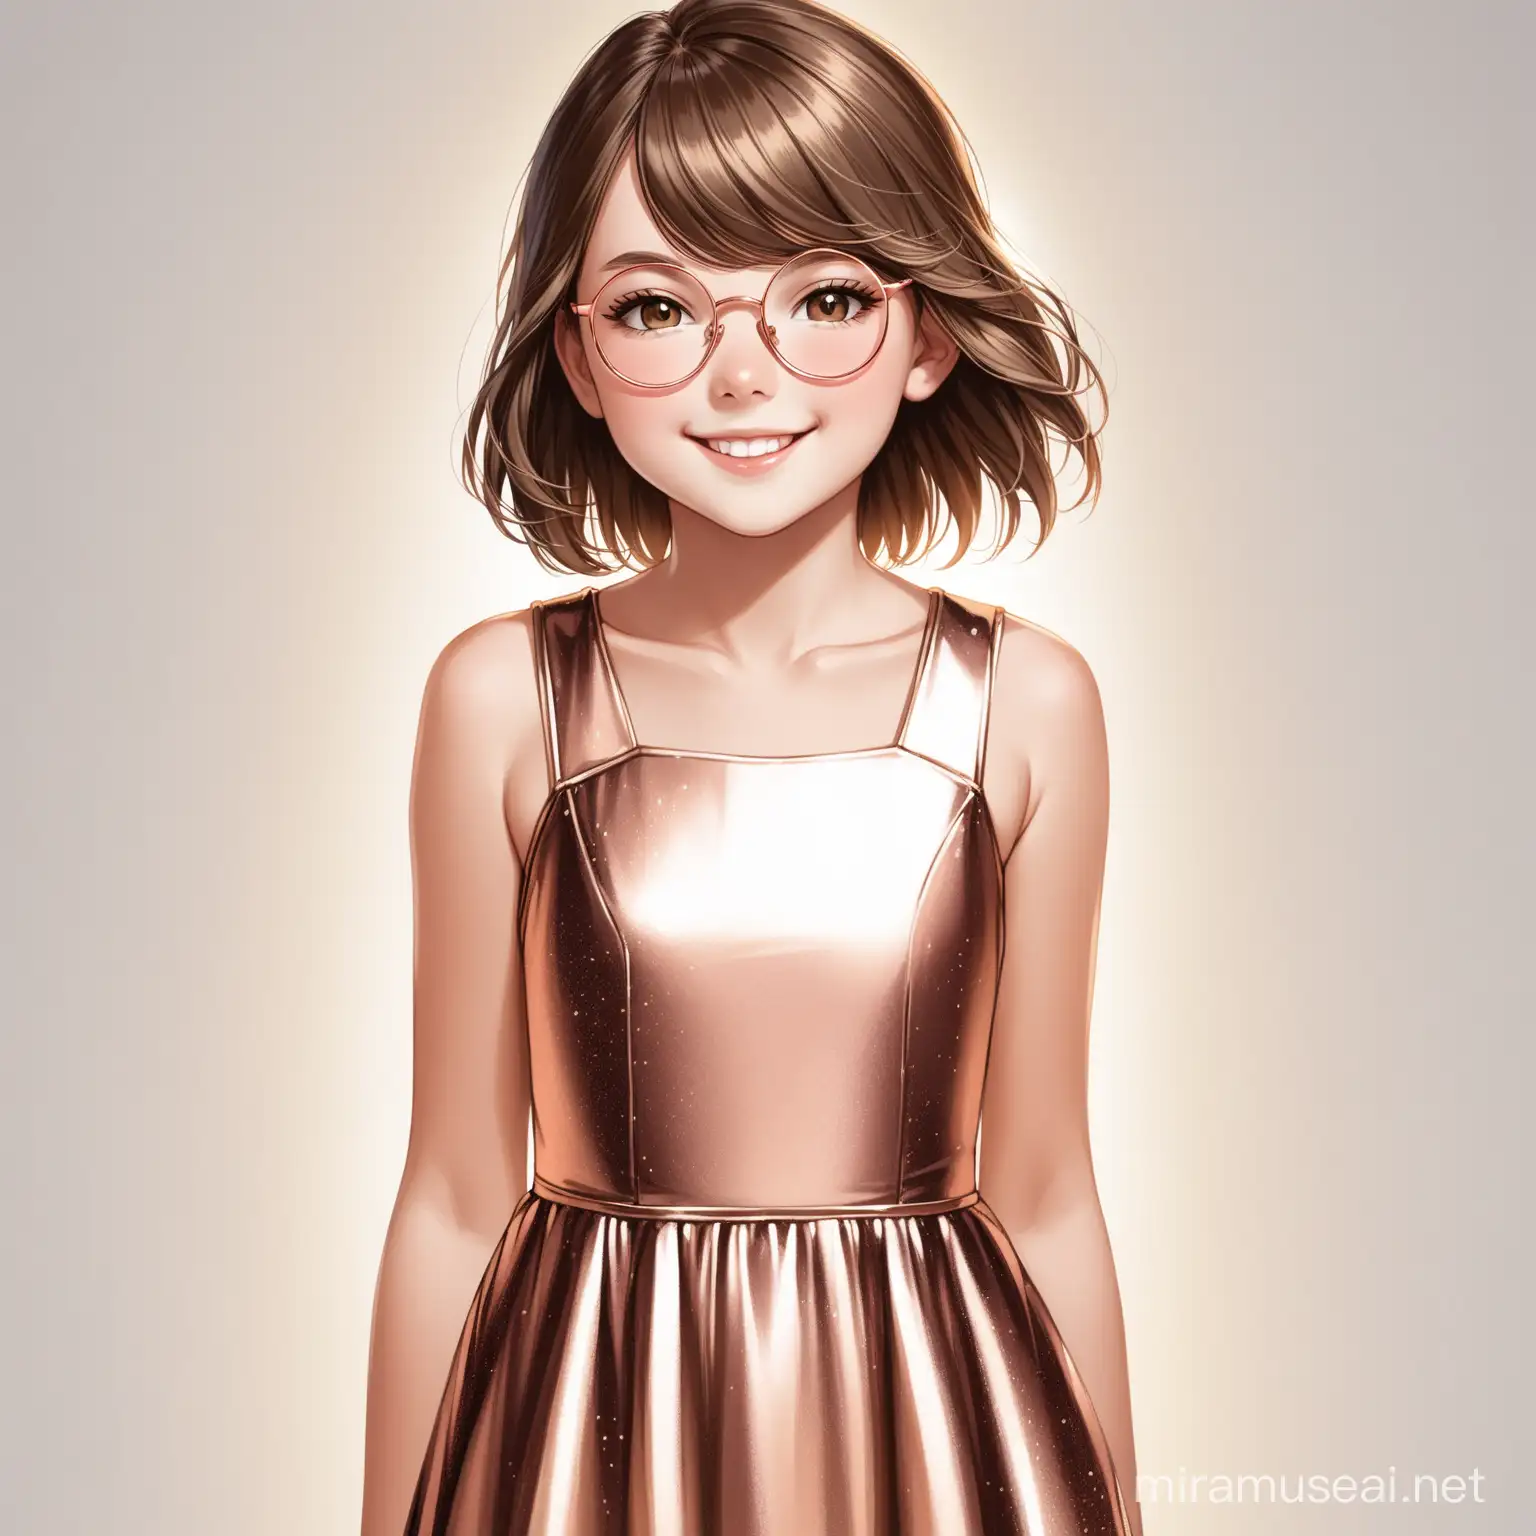 Smiling 12YearOld Girl in Taylor Swift Reputation Dress with Rose Gold Glasses